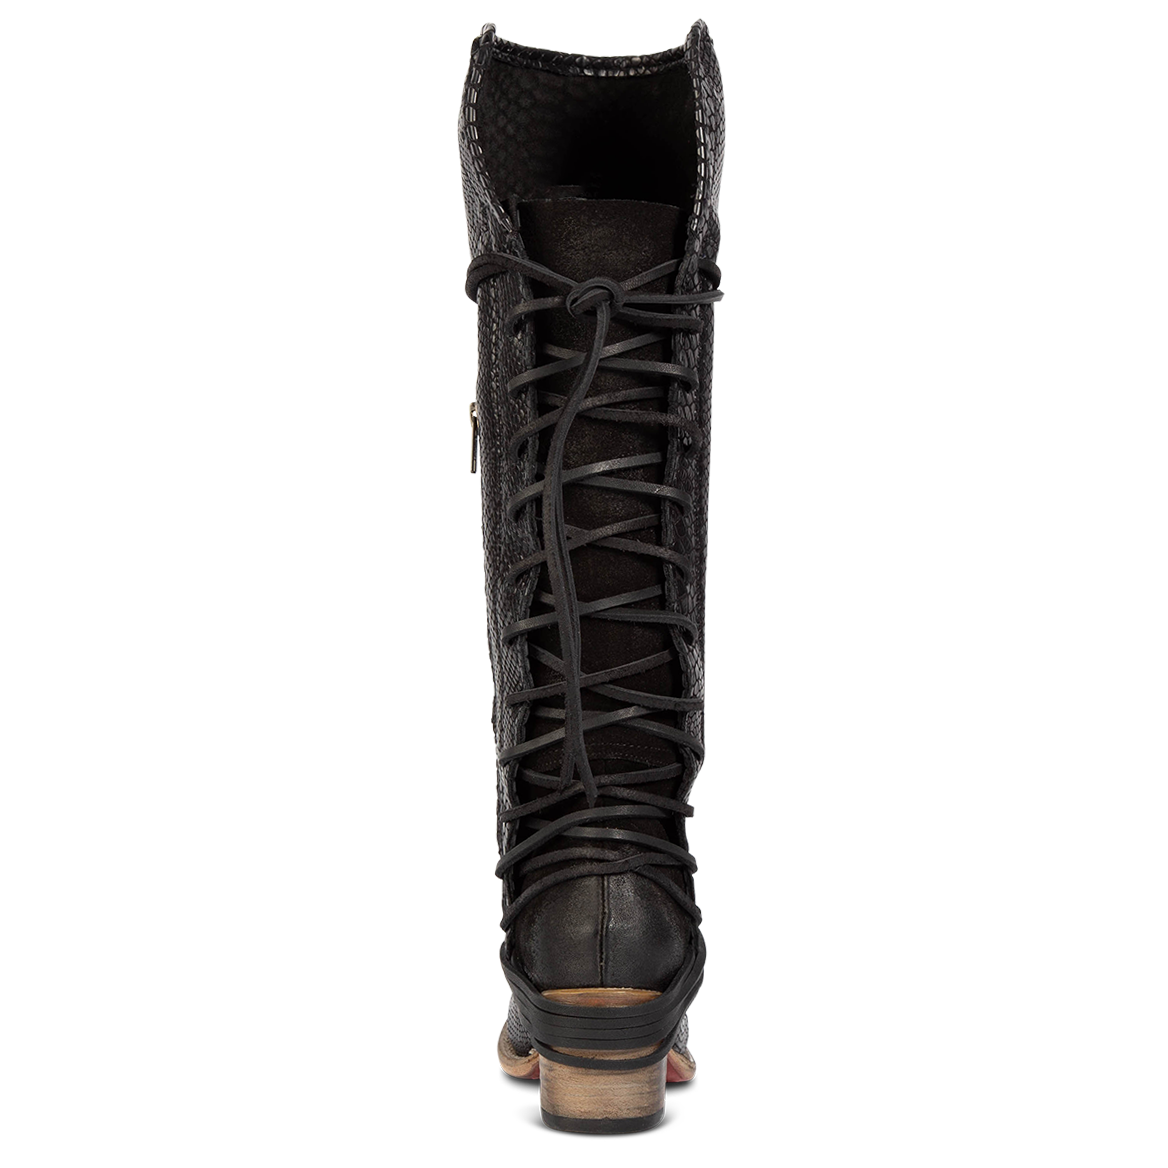 Back view showing expandable panel with adjustable leather lacing on FREEBIRD women's Coal black snake tall boot